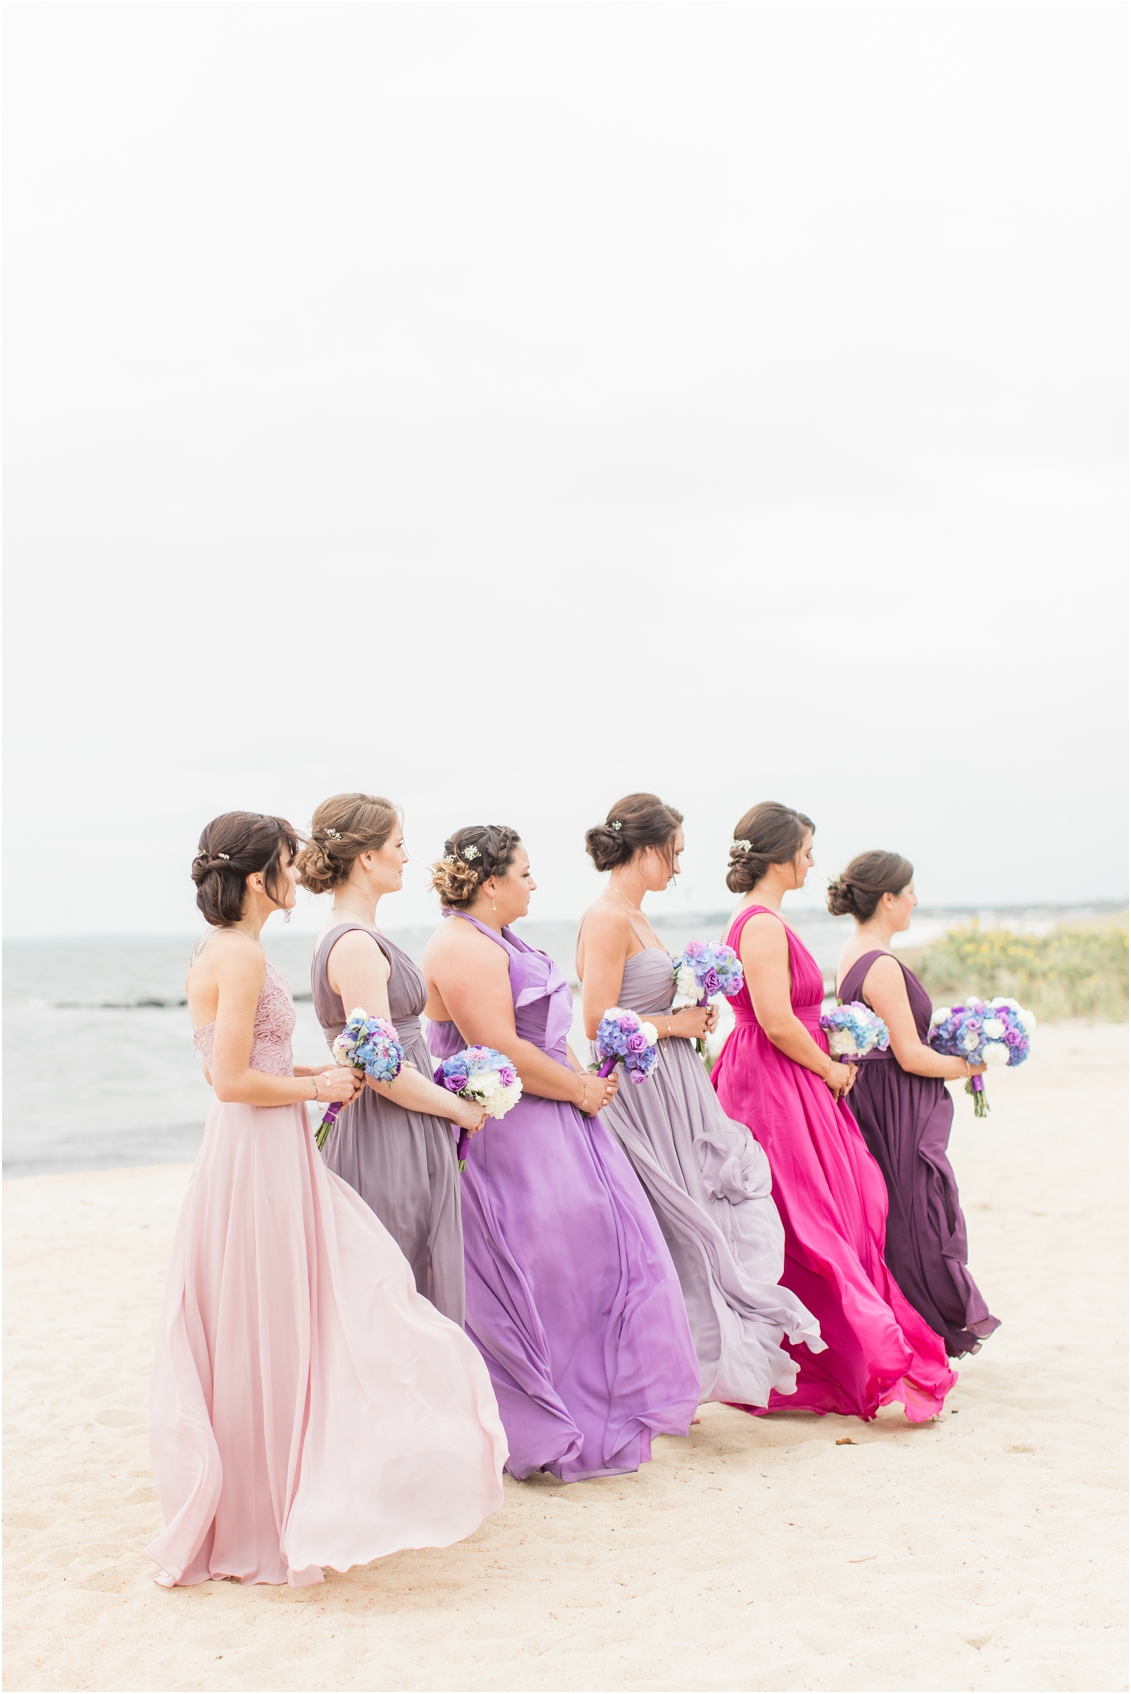 shades of purple bridesmaids dresses by gaby caskey photography